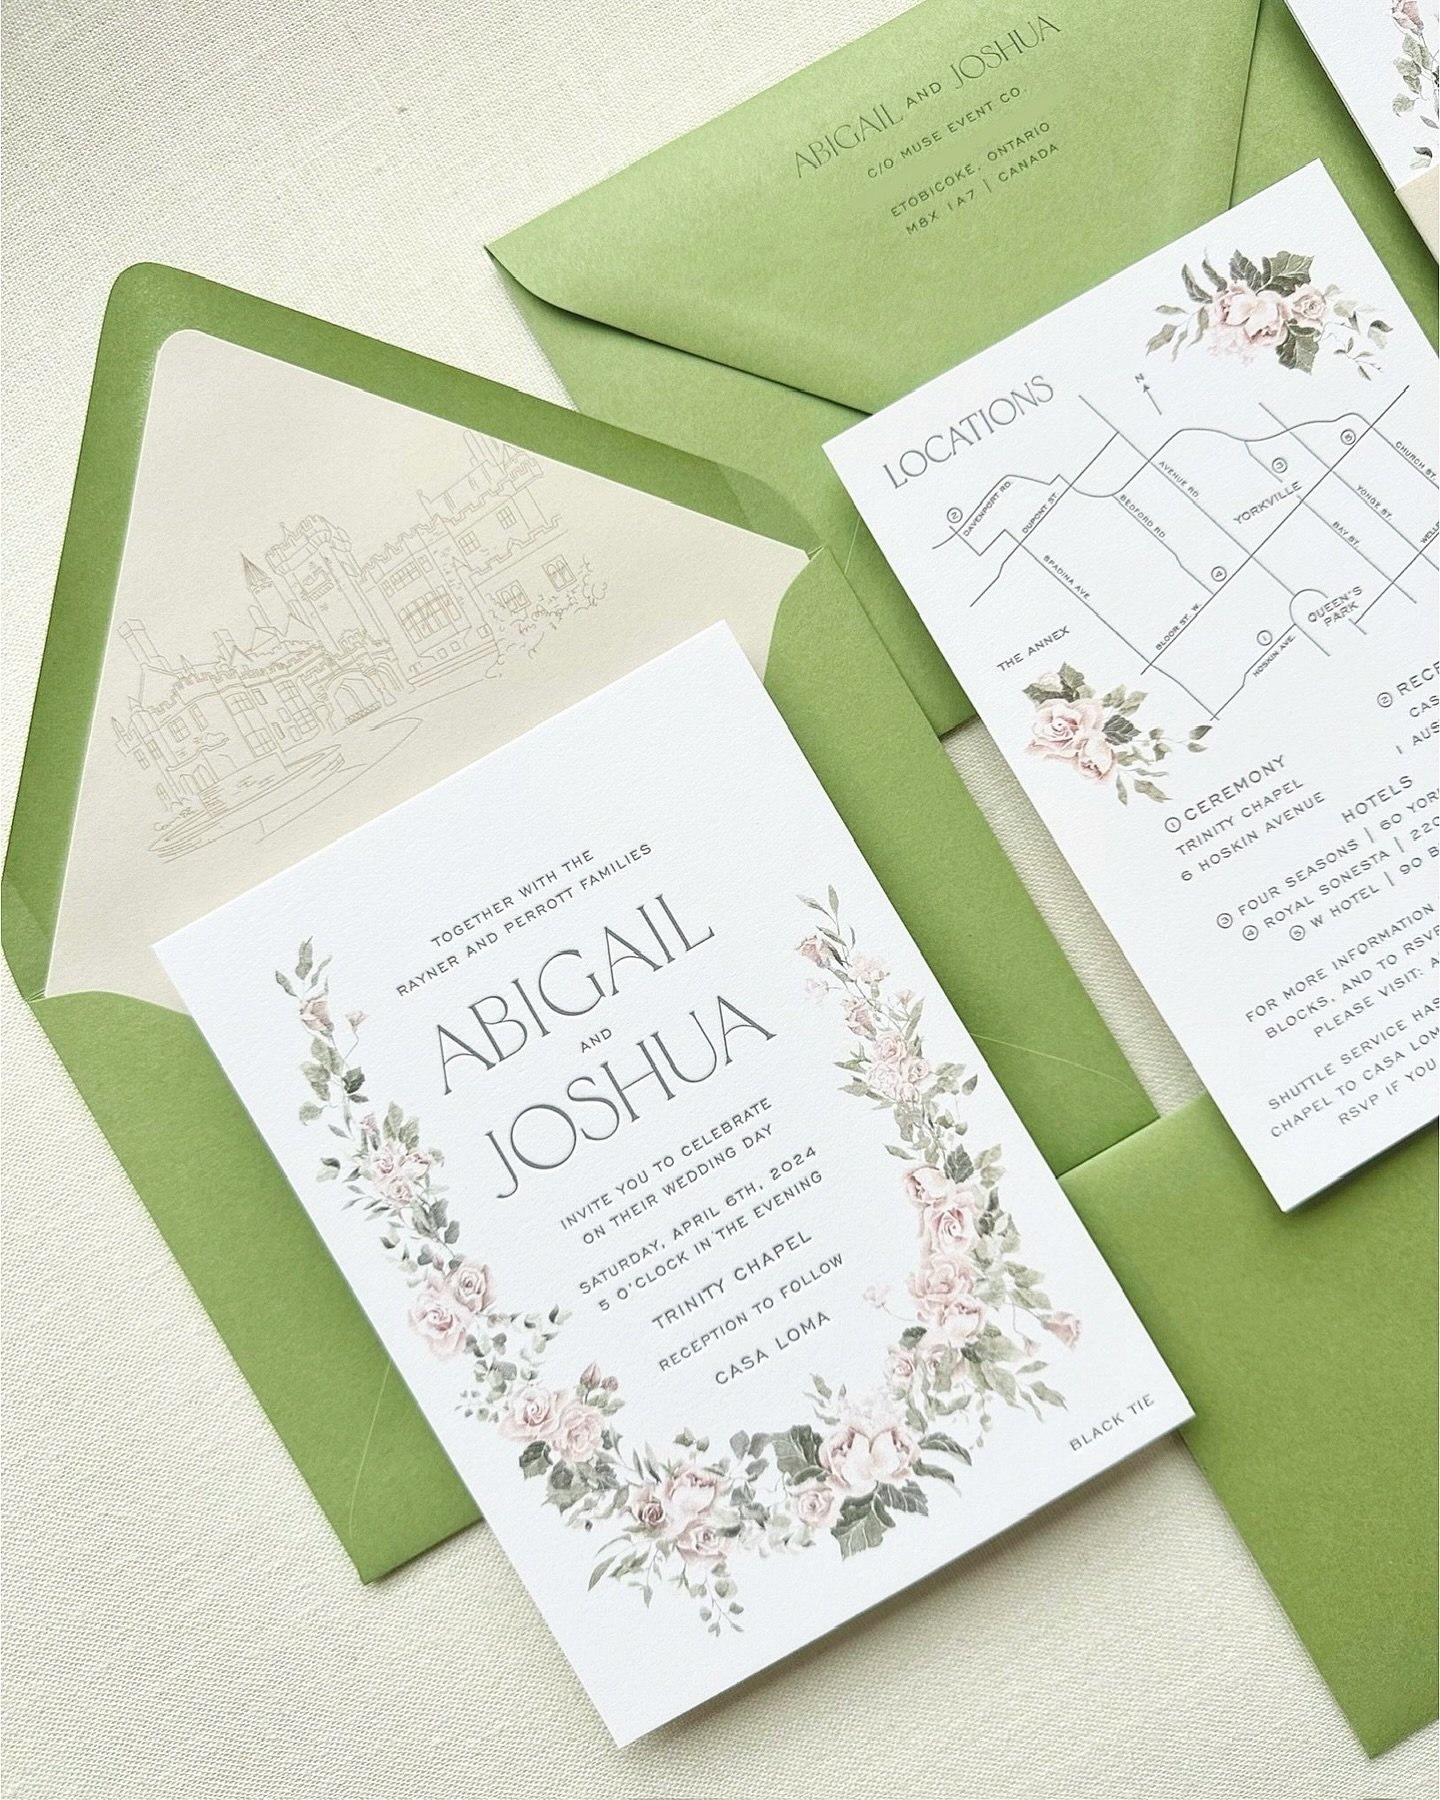 Congratulations to @museeventco couple A+J who tied the knot this past weekend! We love their fresh, Spring-inspired custom invitation set that helped kick off our wedding season!
⠀
#stationery #paperandposte #letterpress #customdesign #torontoweddin